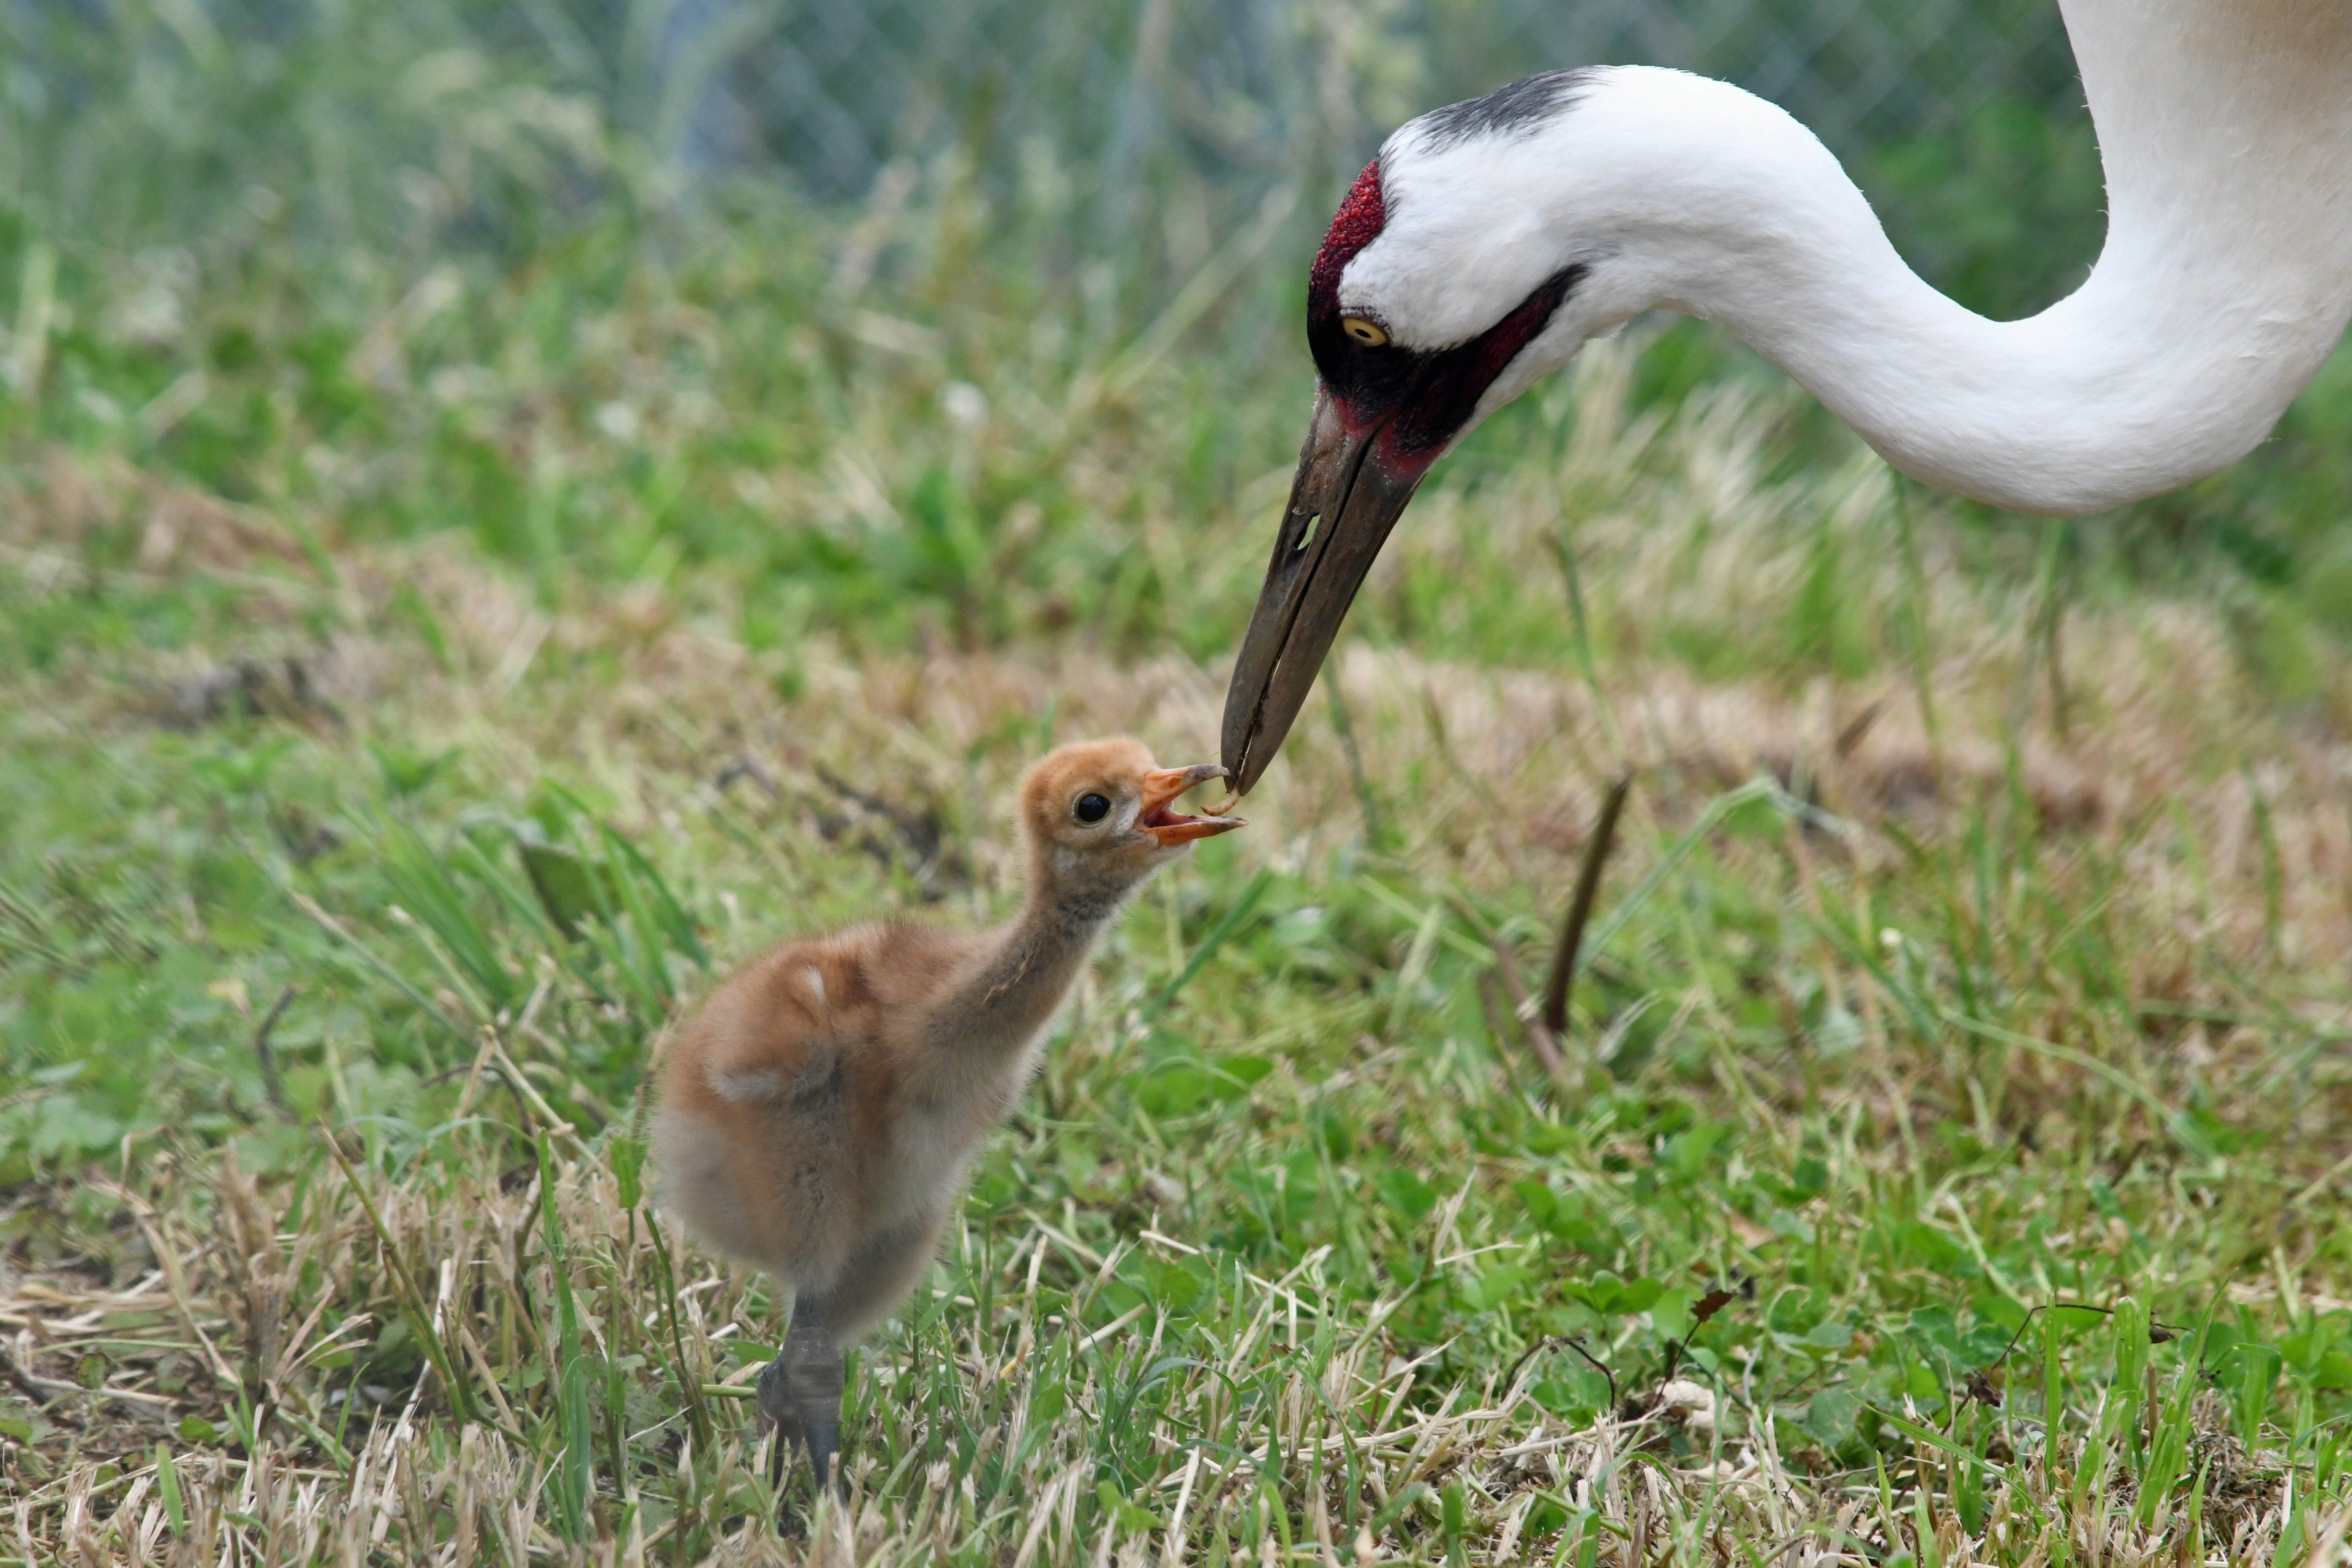 A whooping crane chick receives a mealworm from its mother.